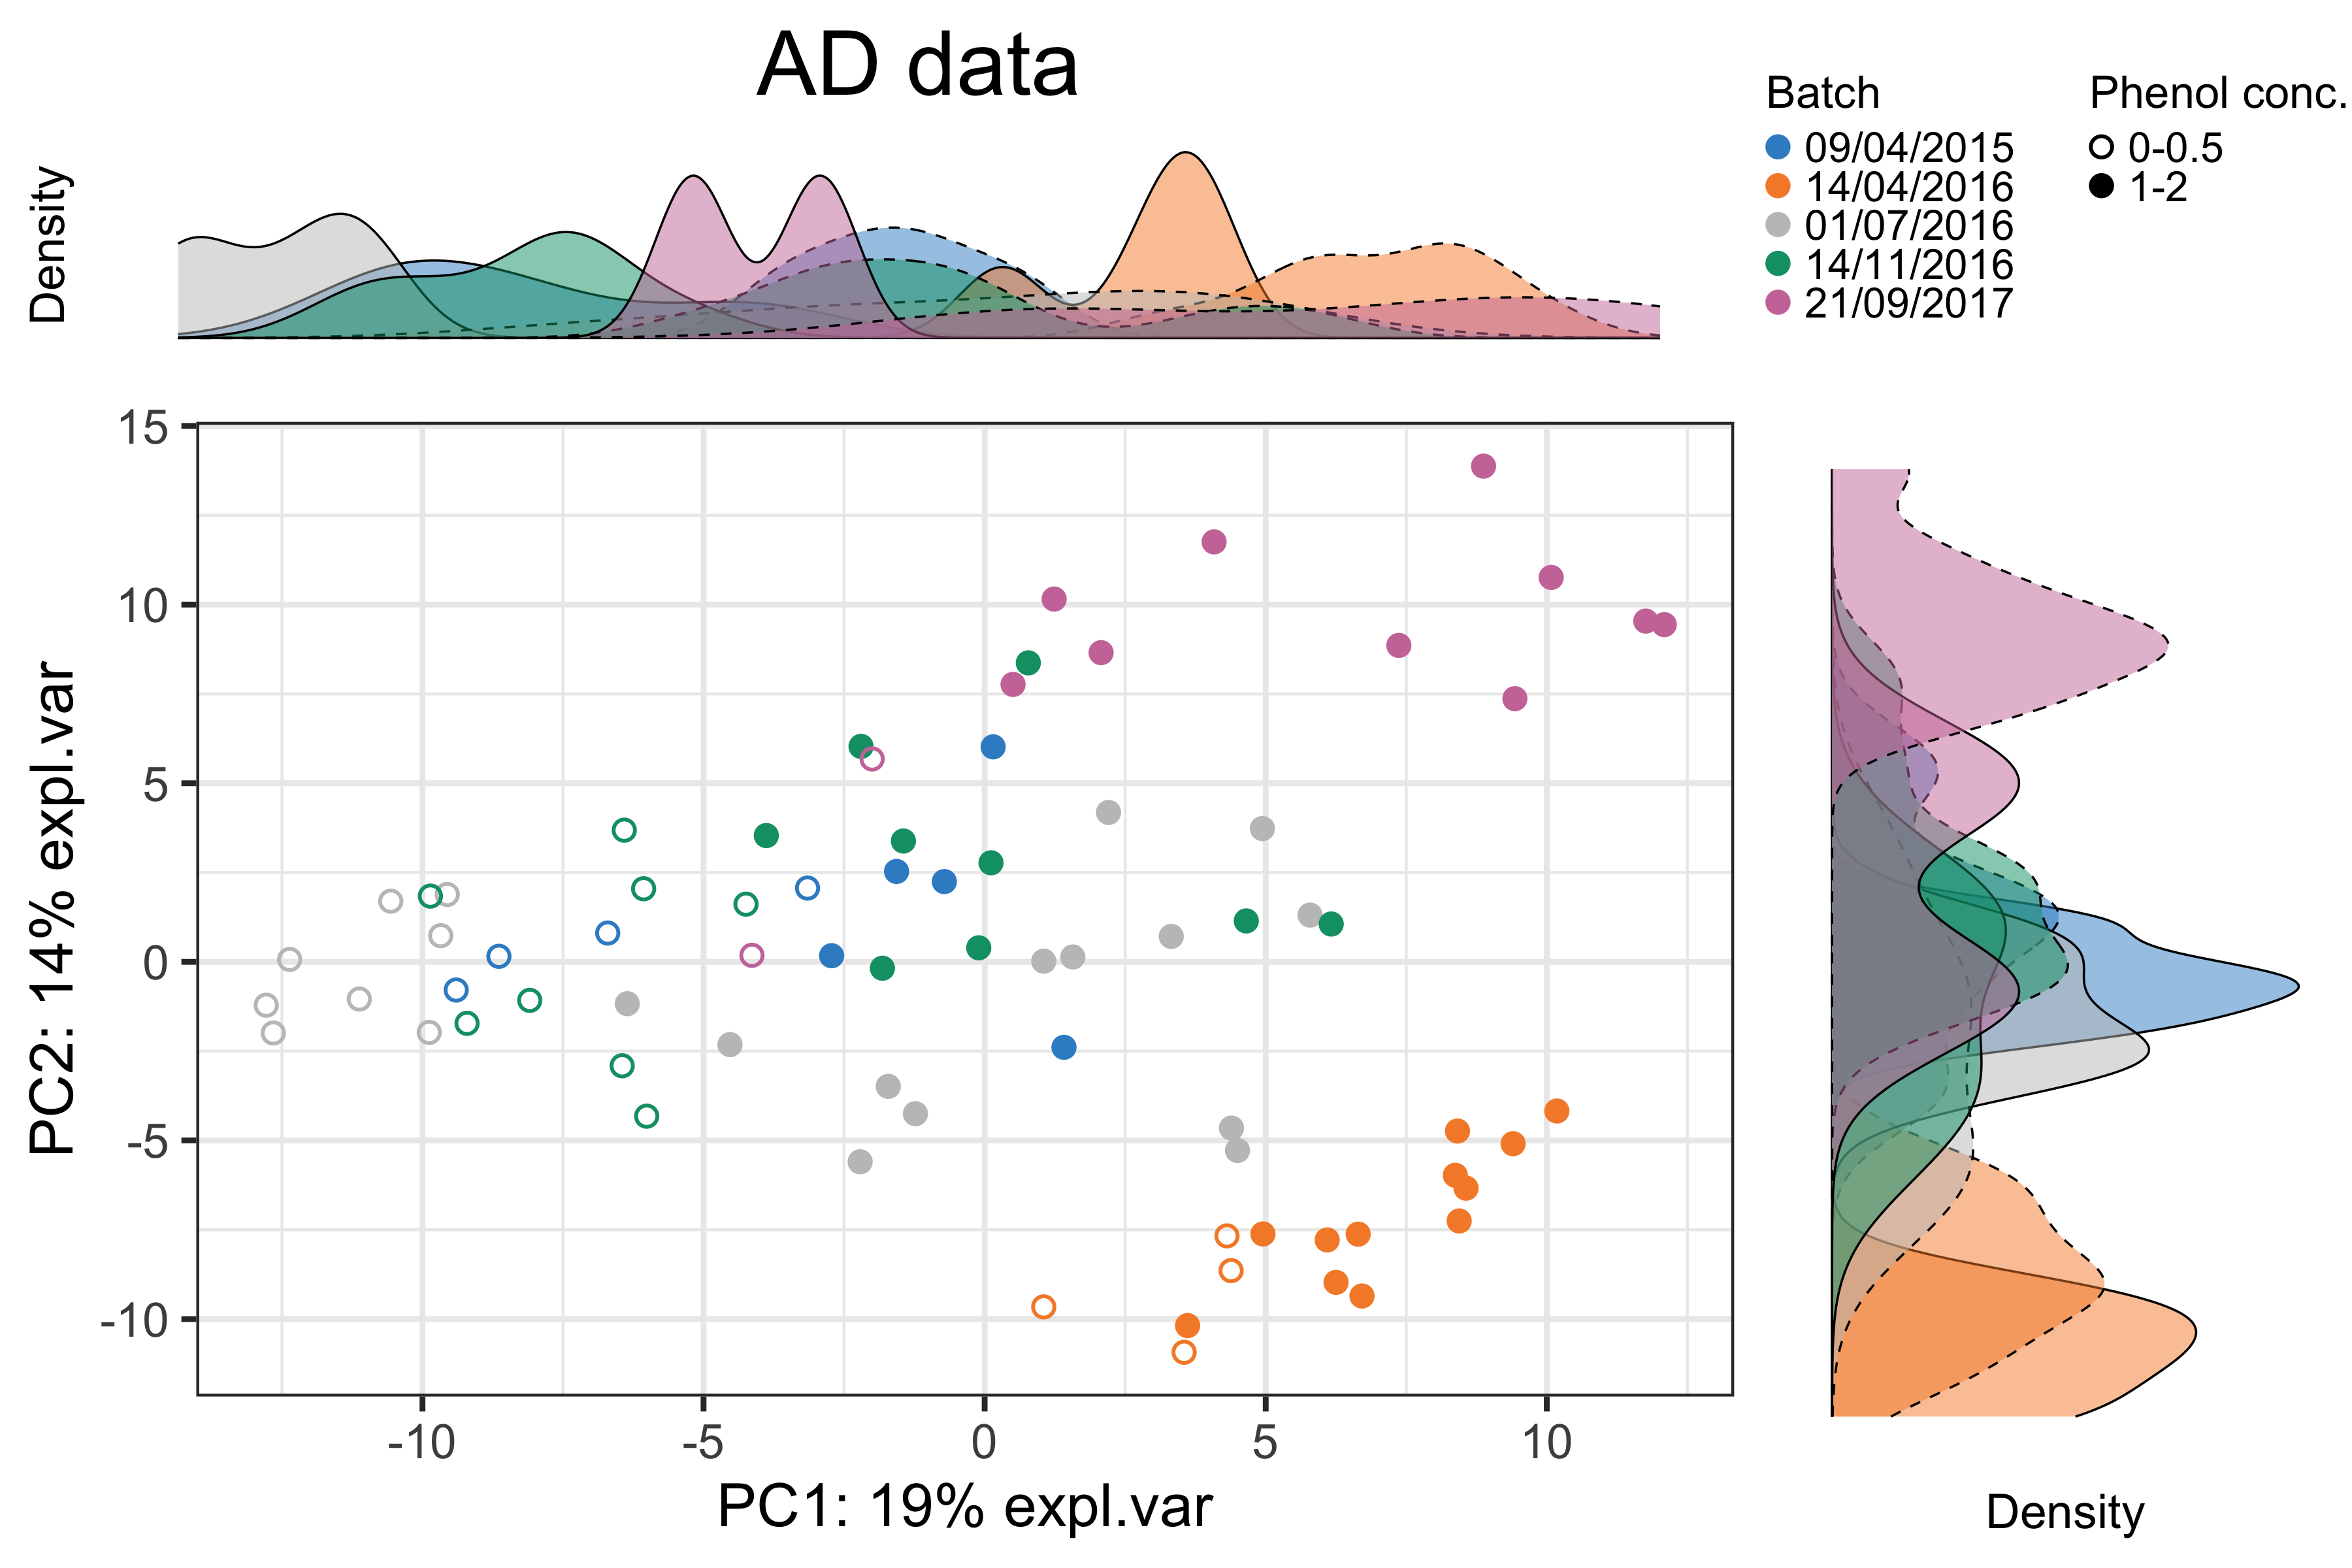 The PCA sample plot with densities in the AD data.